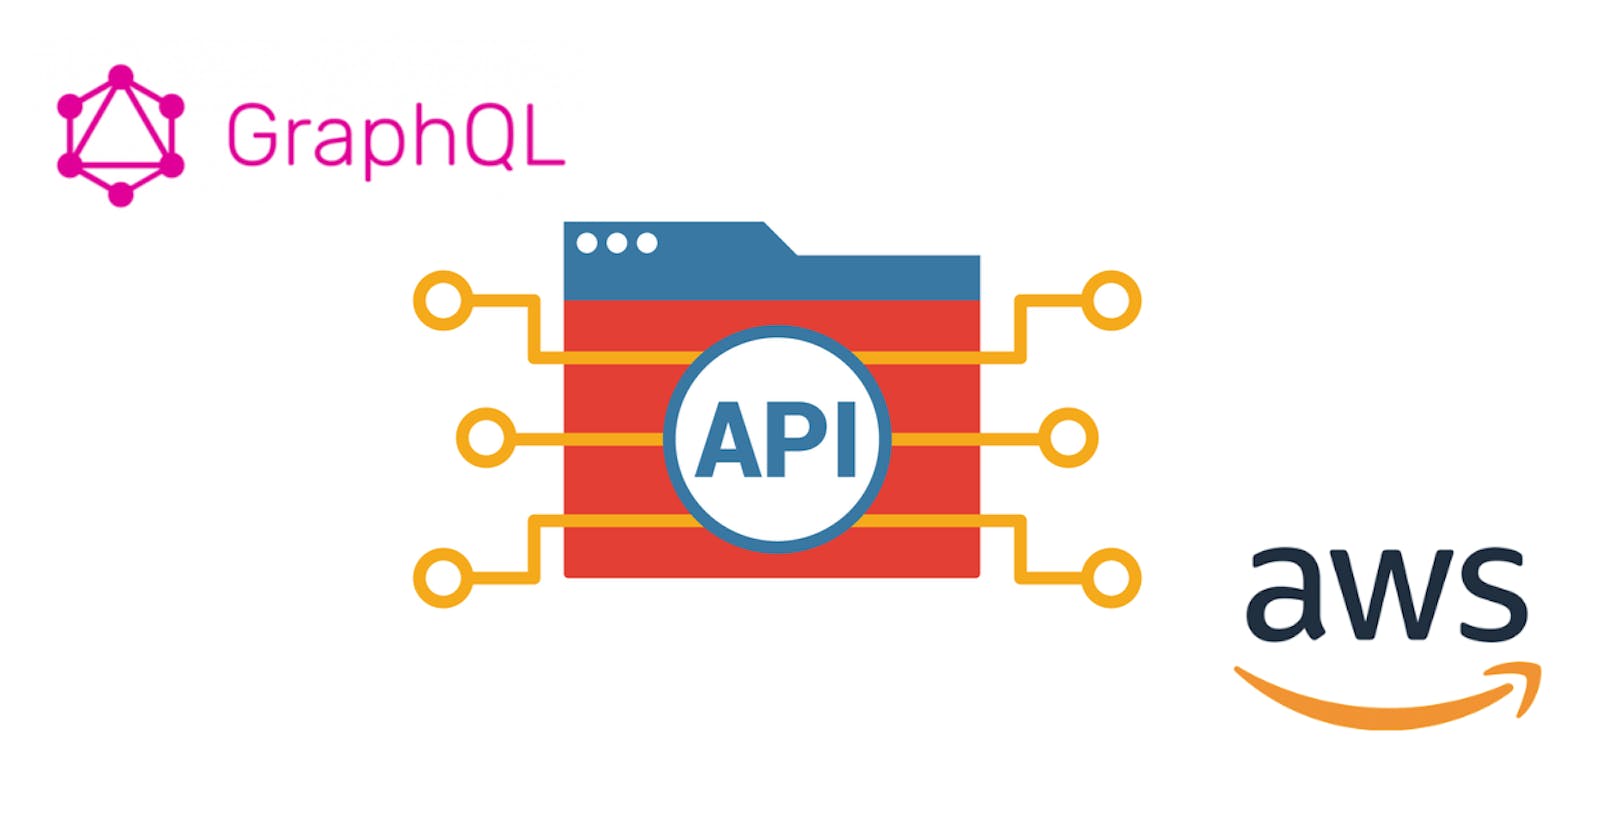 How to Create a GraphQL API with AWS Database in 10 Easy Steps